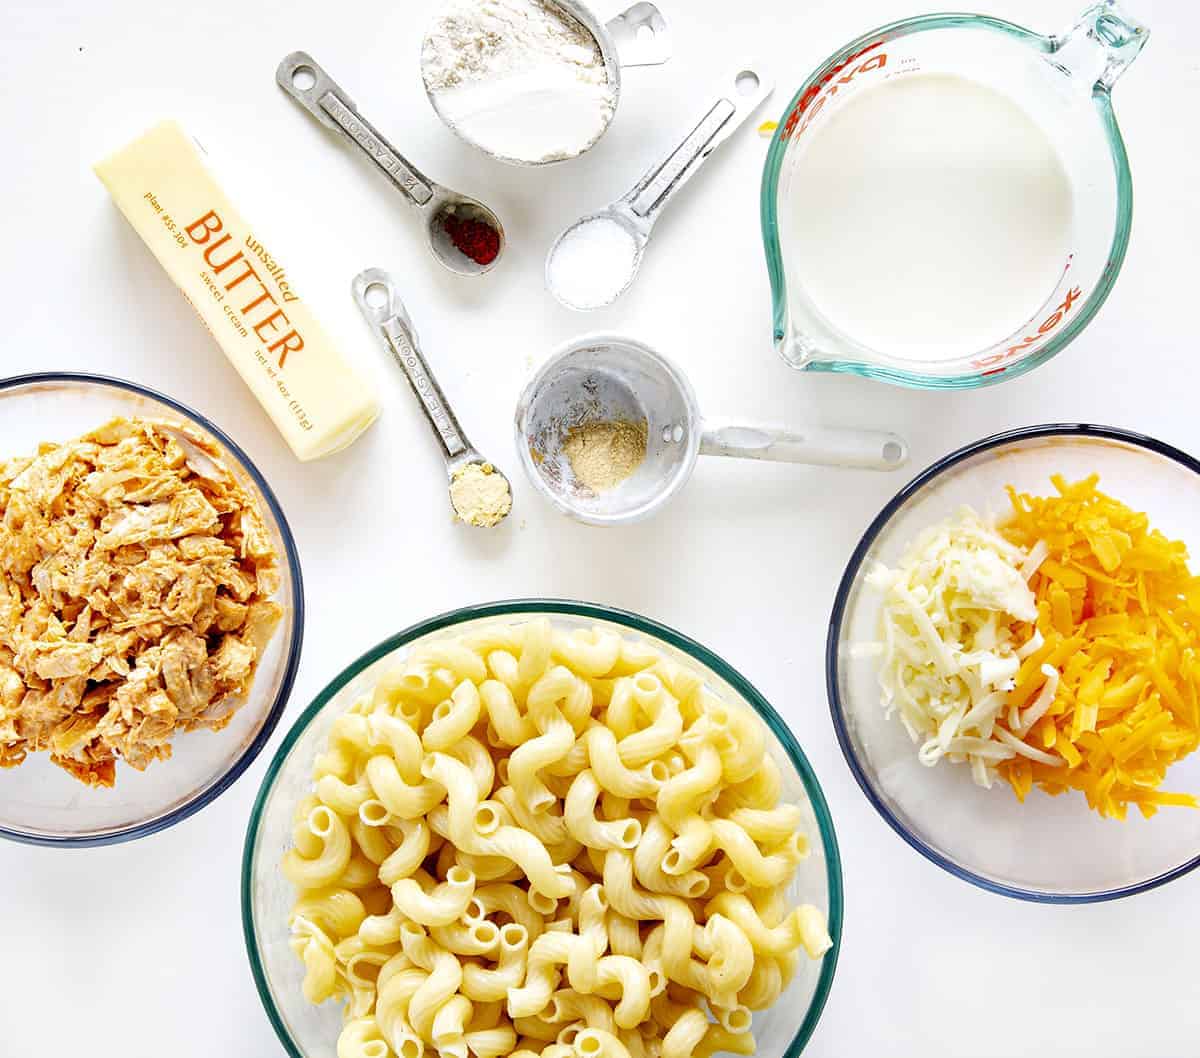 Ingredients for Buffalo Macaroni and Cheese